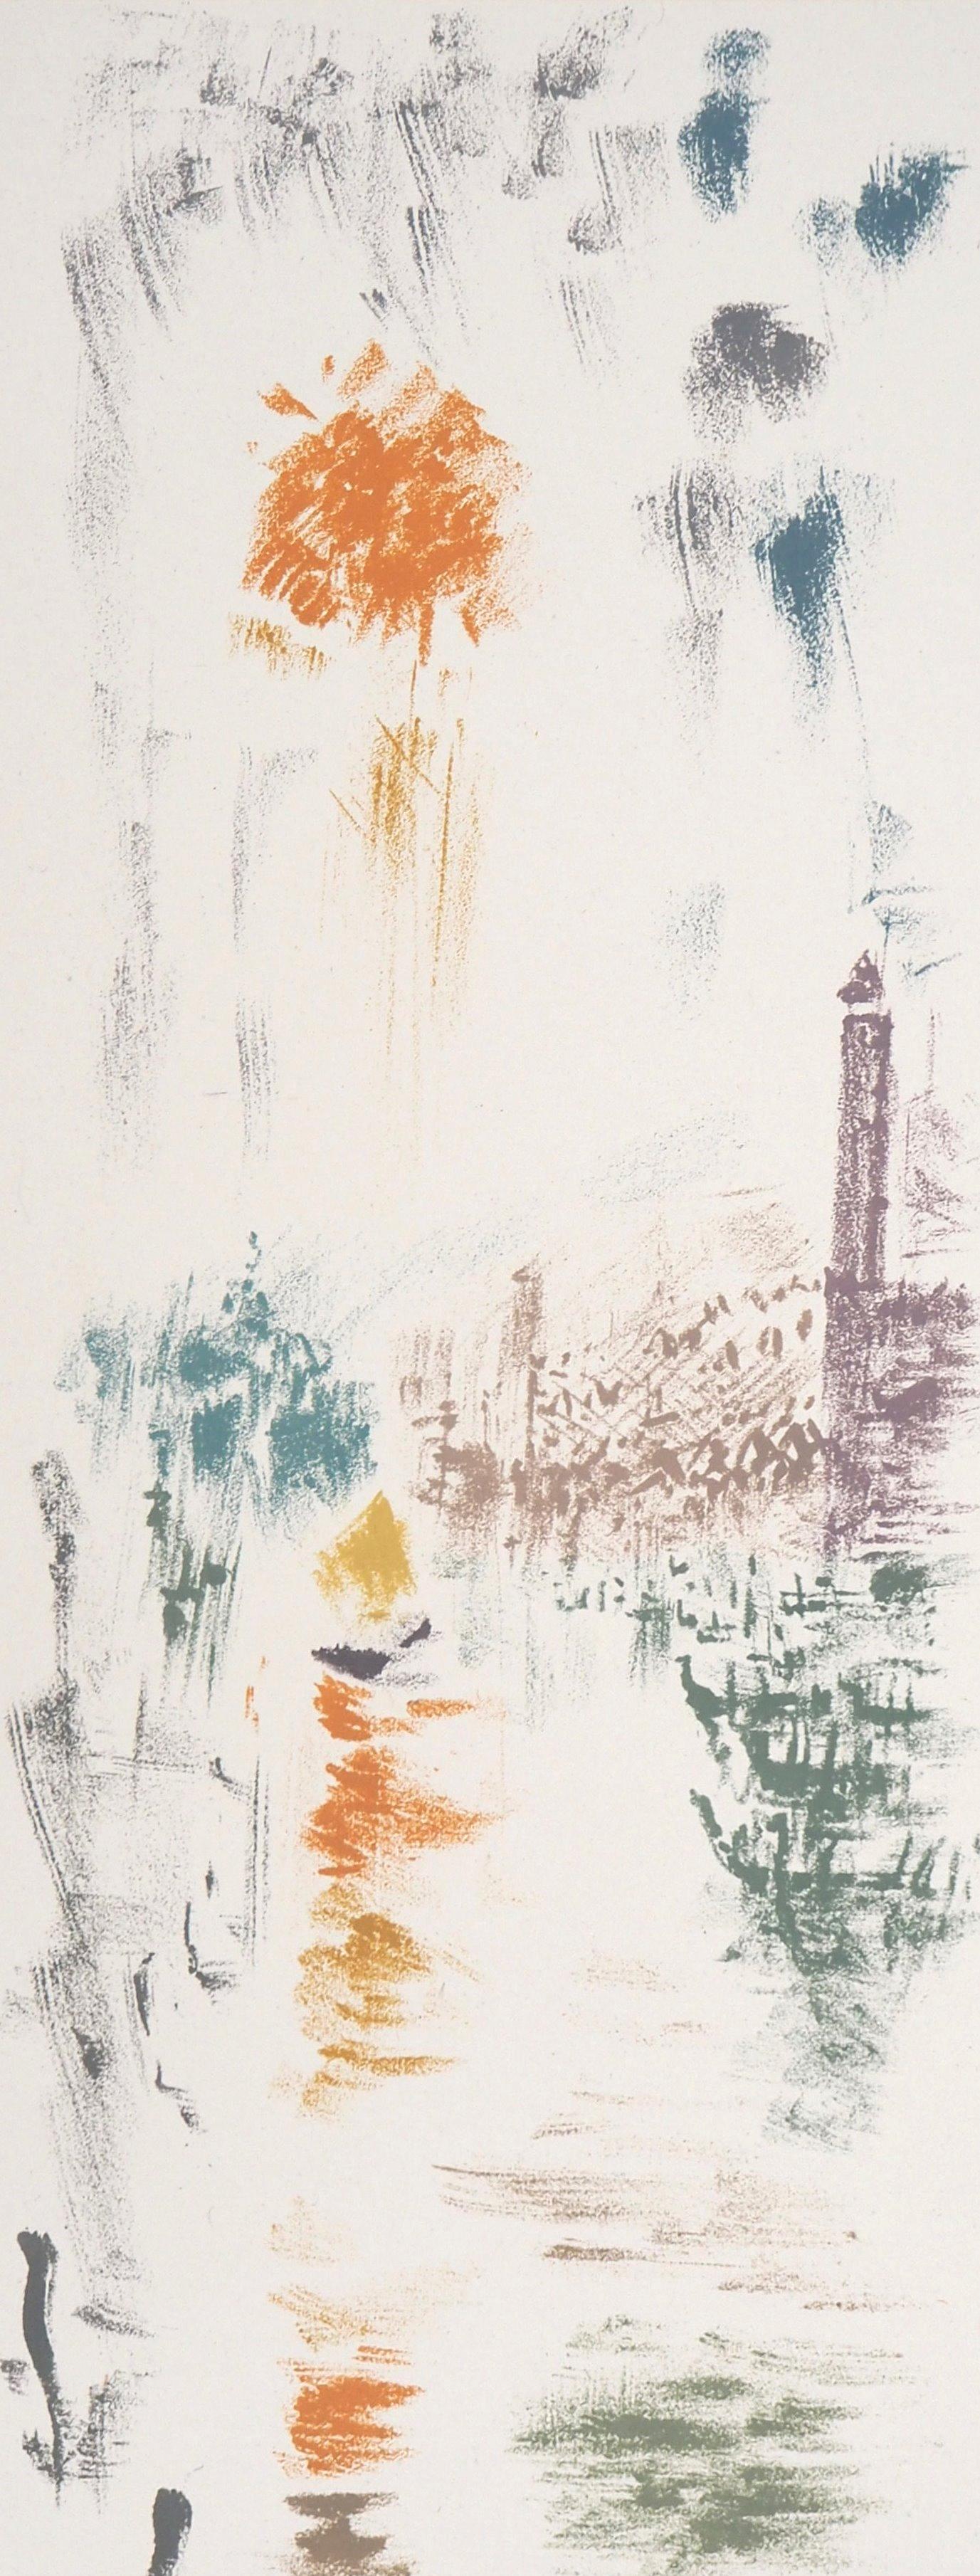 Venice Near San Marco - Original Handsigned Lithograph - Modern Print by André Masson